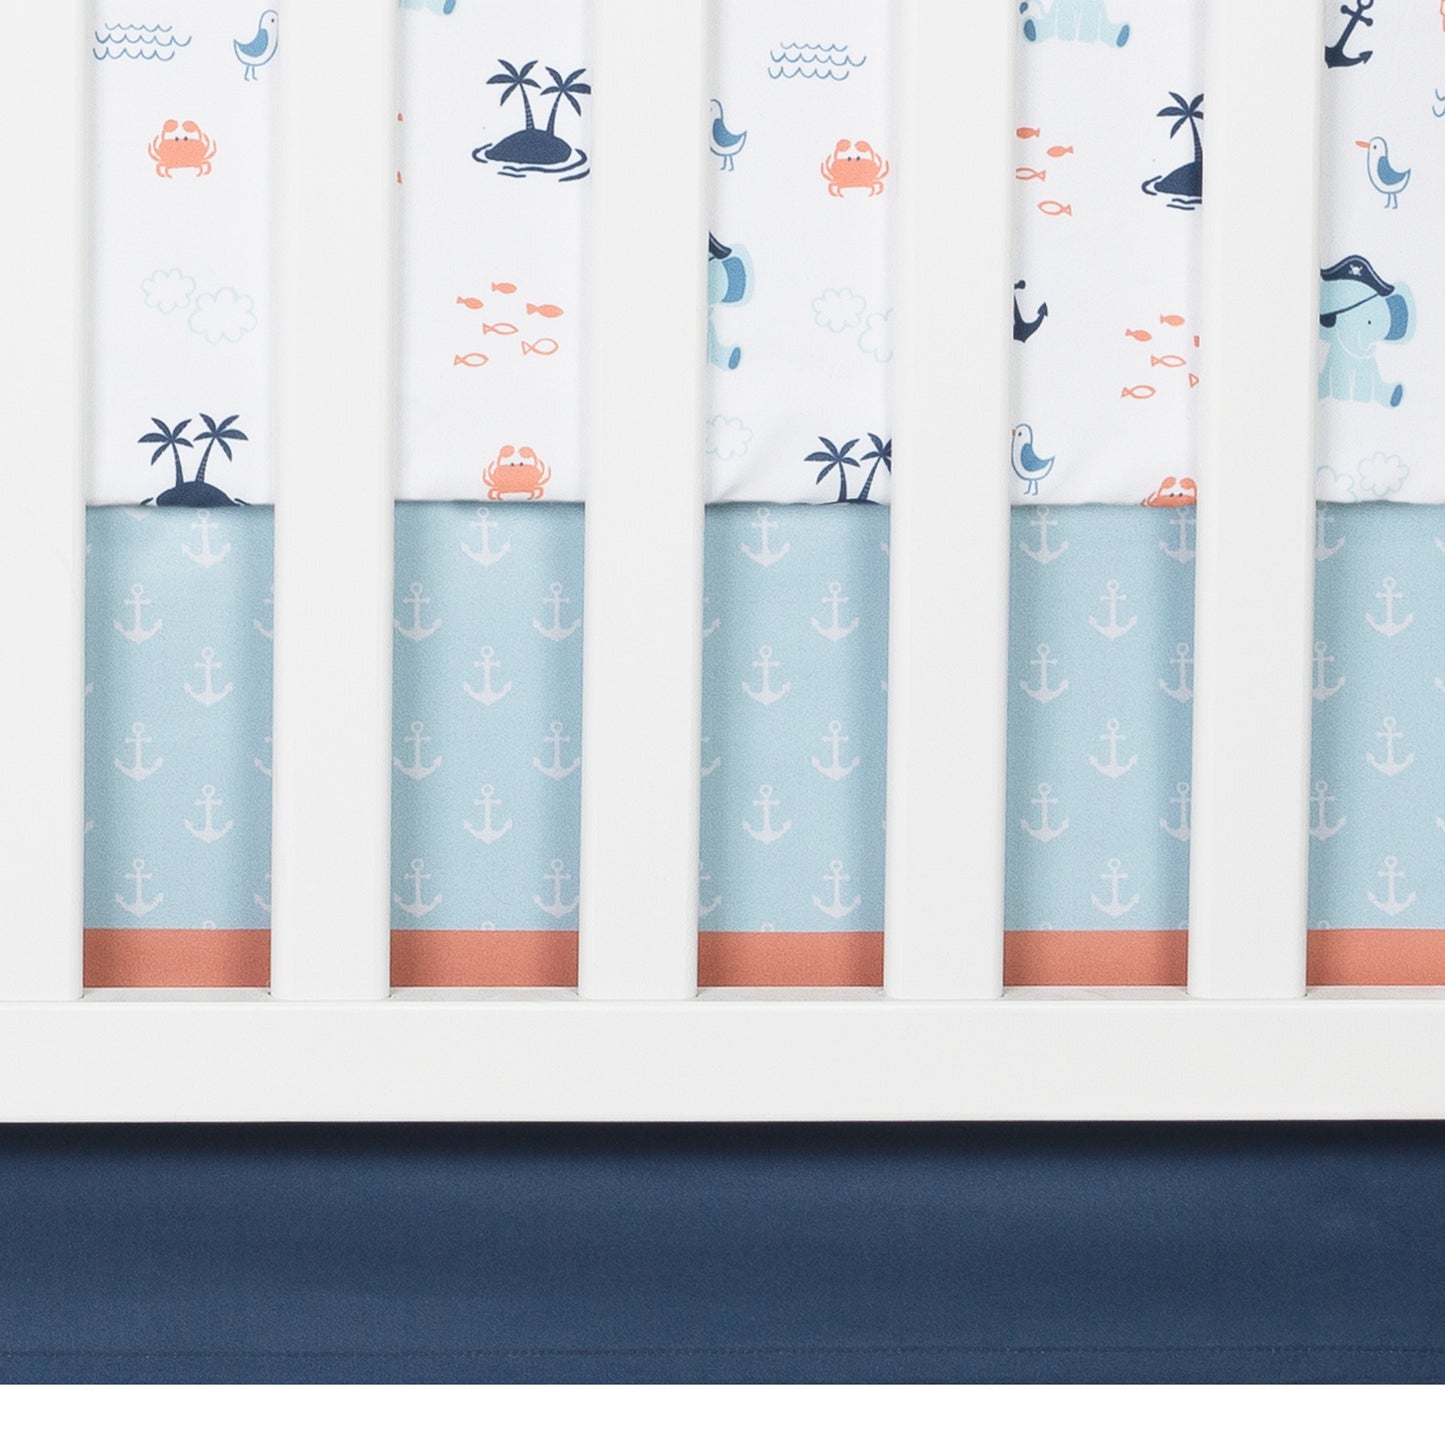 Ahoy Archie 4 Piece Crib Bedding Set by Sammy & Lou zoomed in view or crib skirt and crib sheet